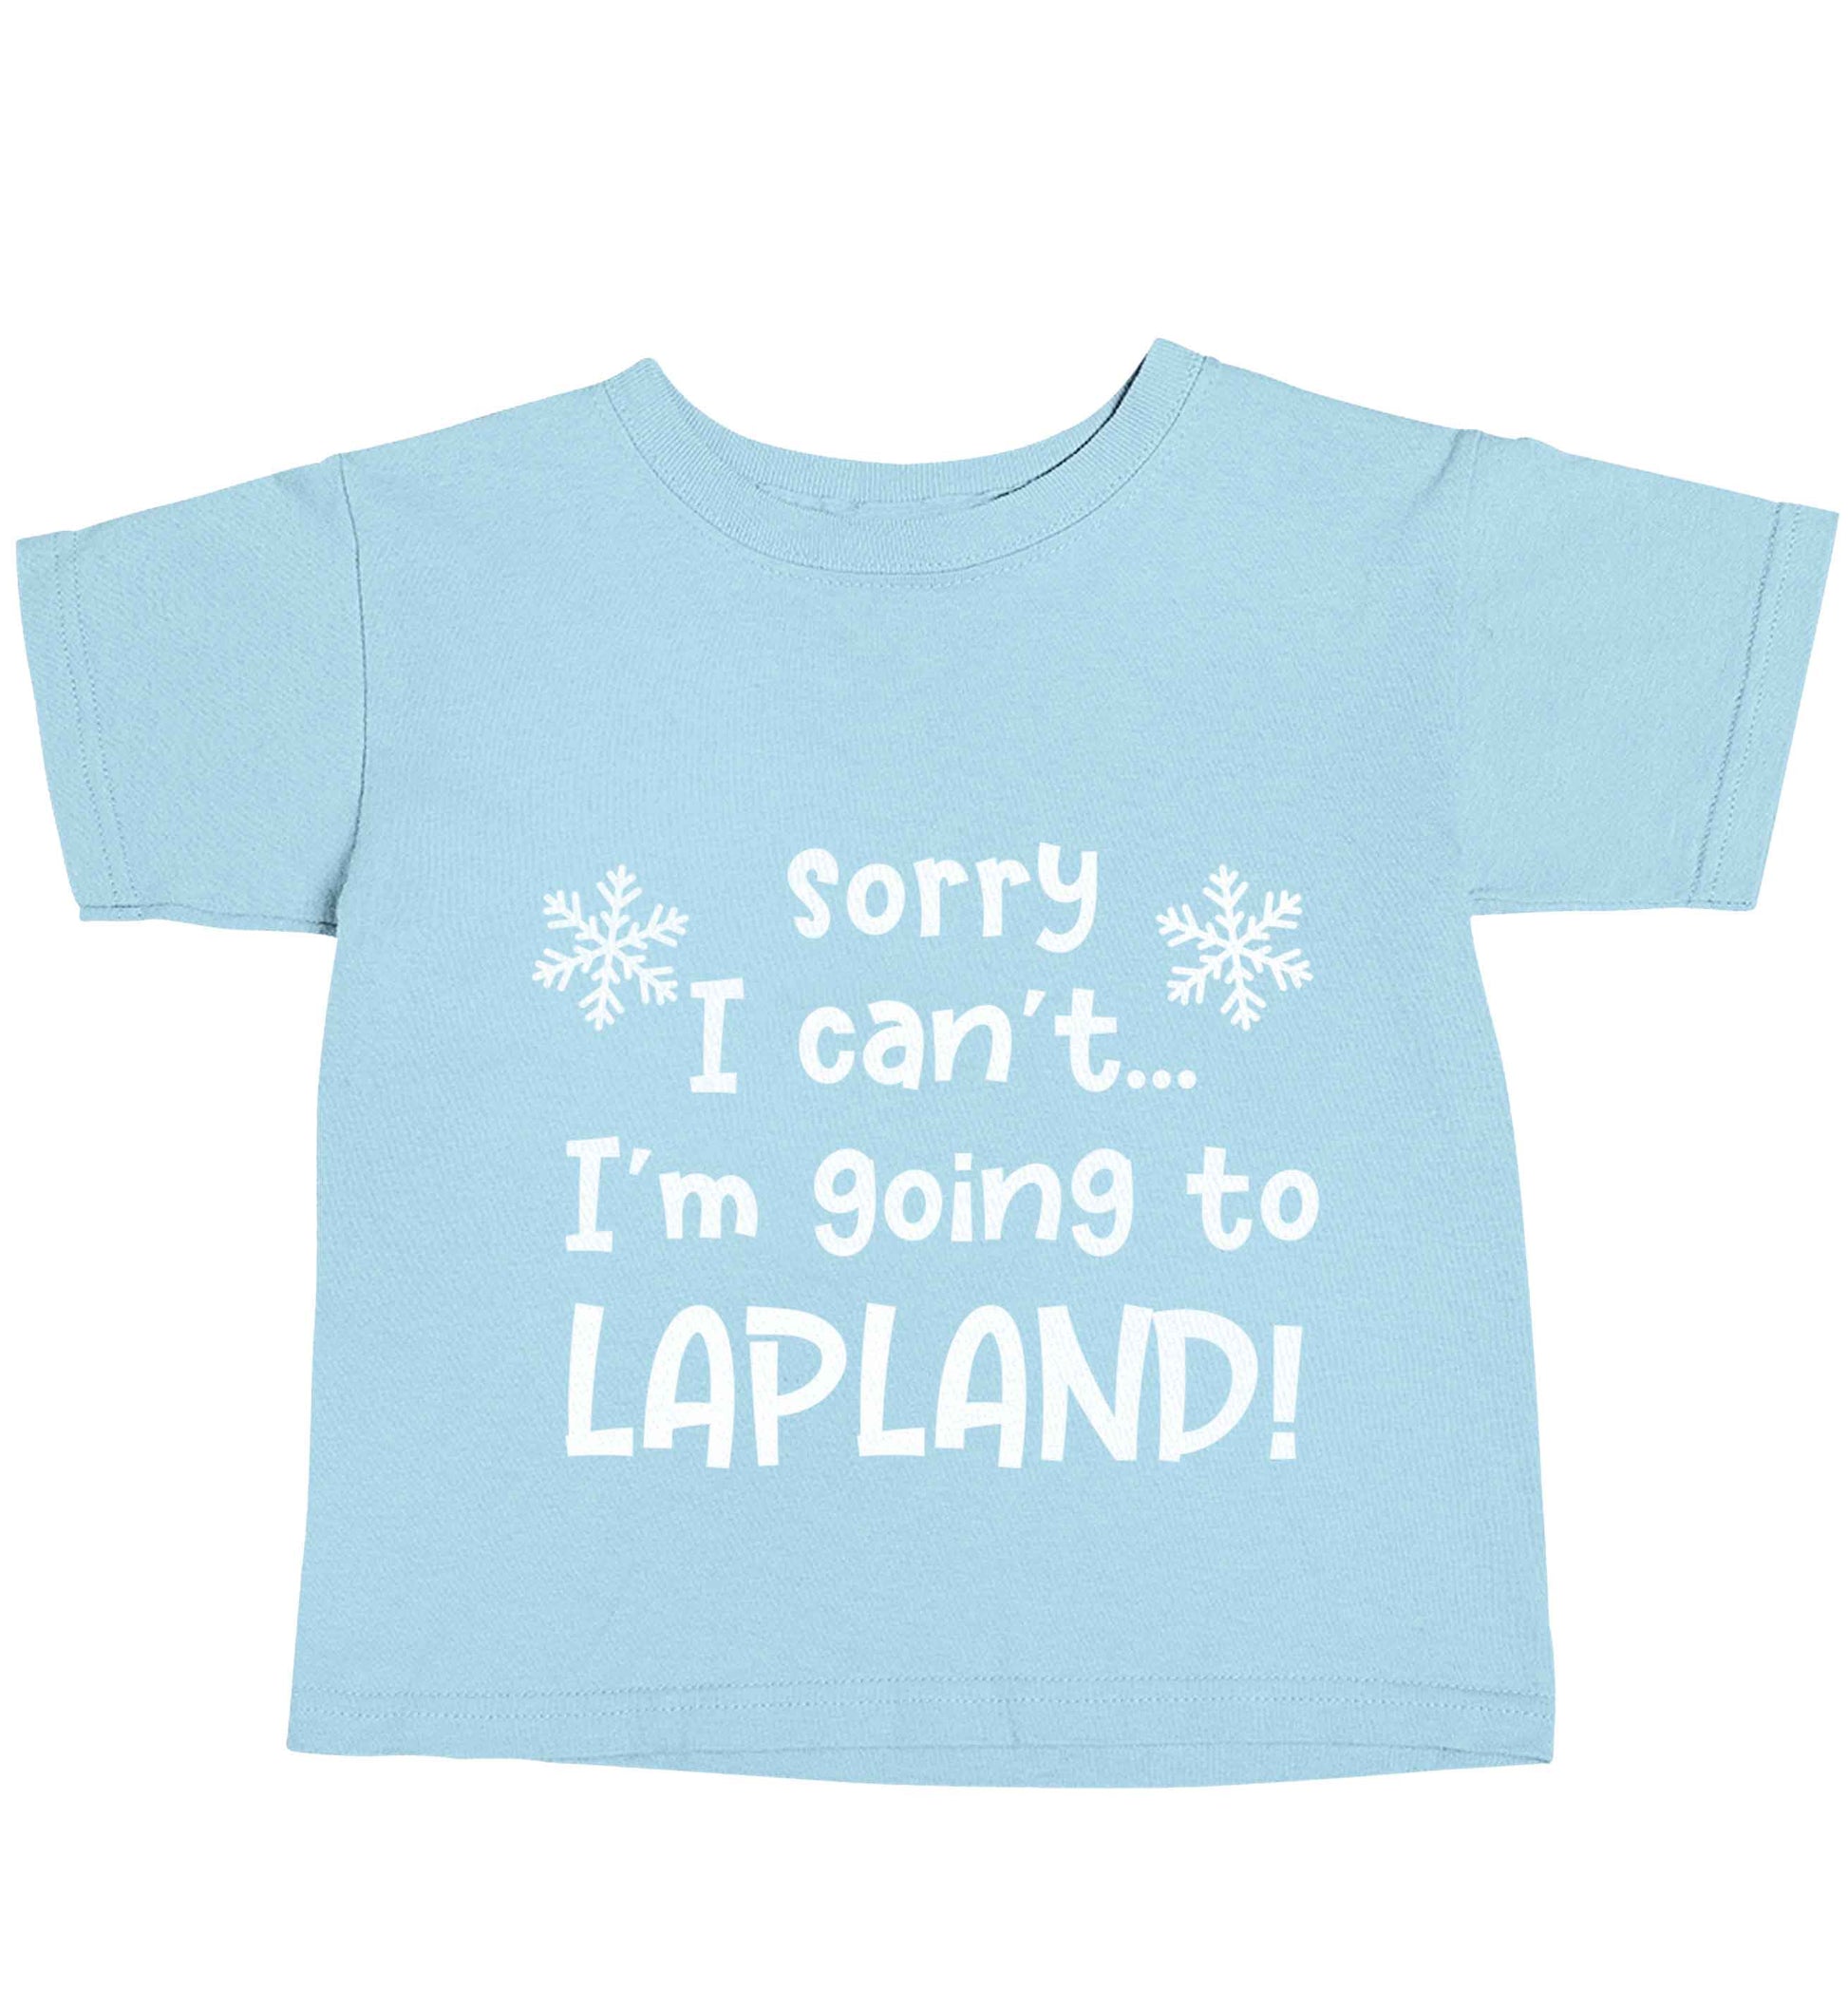 Sorry I can't I'm going to Lapland light blue baby toddler Tshirt 2 Years